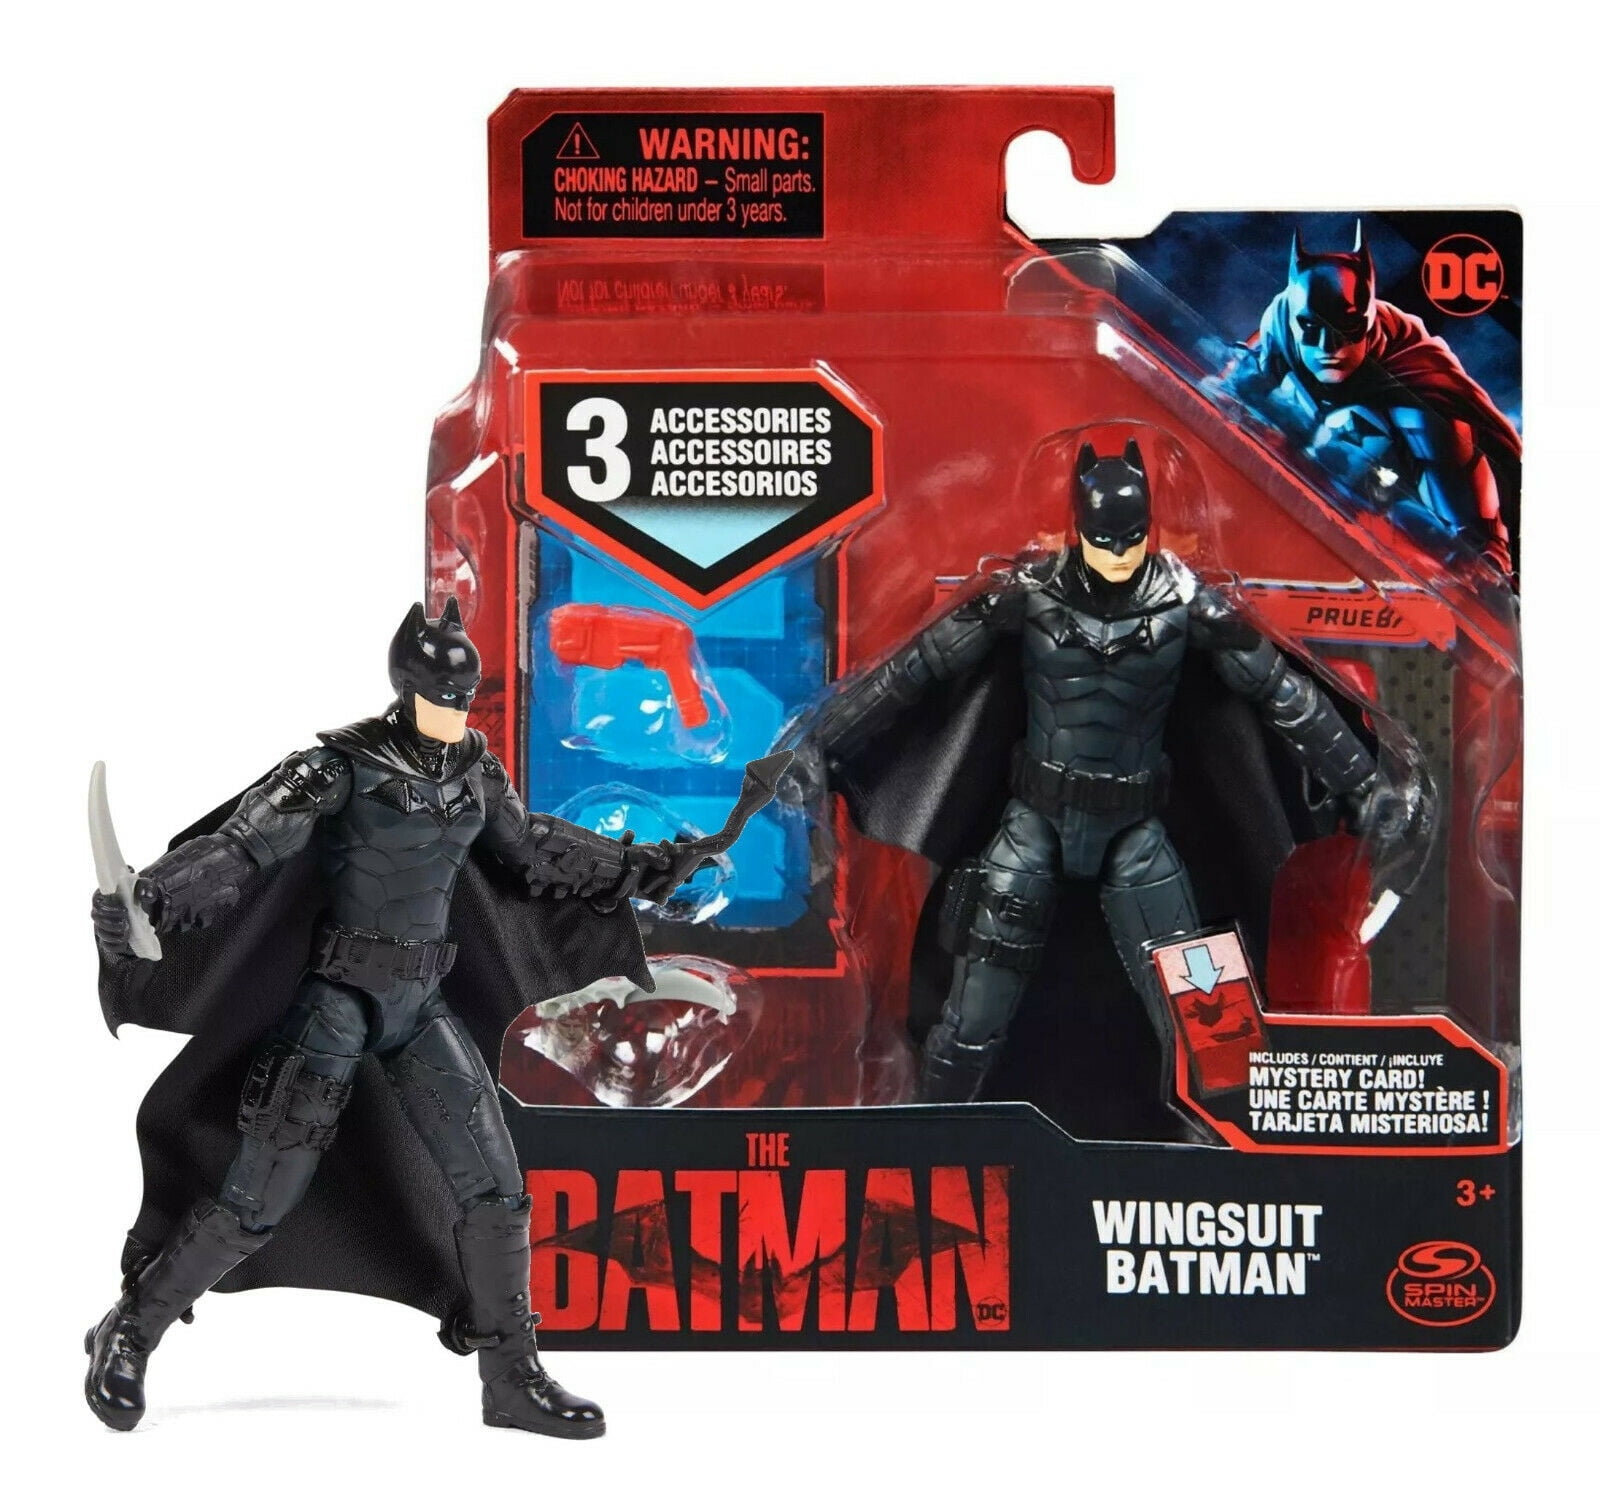 Batman Begins Bruce Wayne Action Figure Kids Toy New Gift Fast Shipping for 2021 